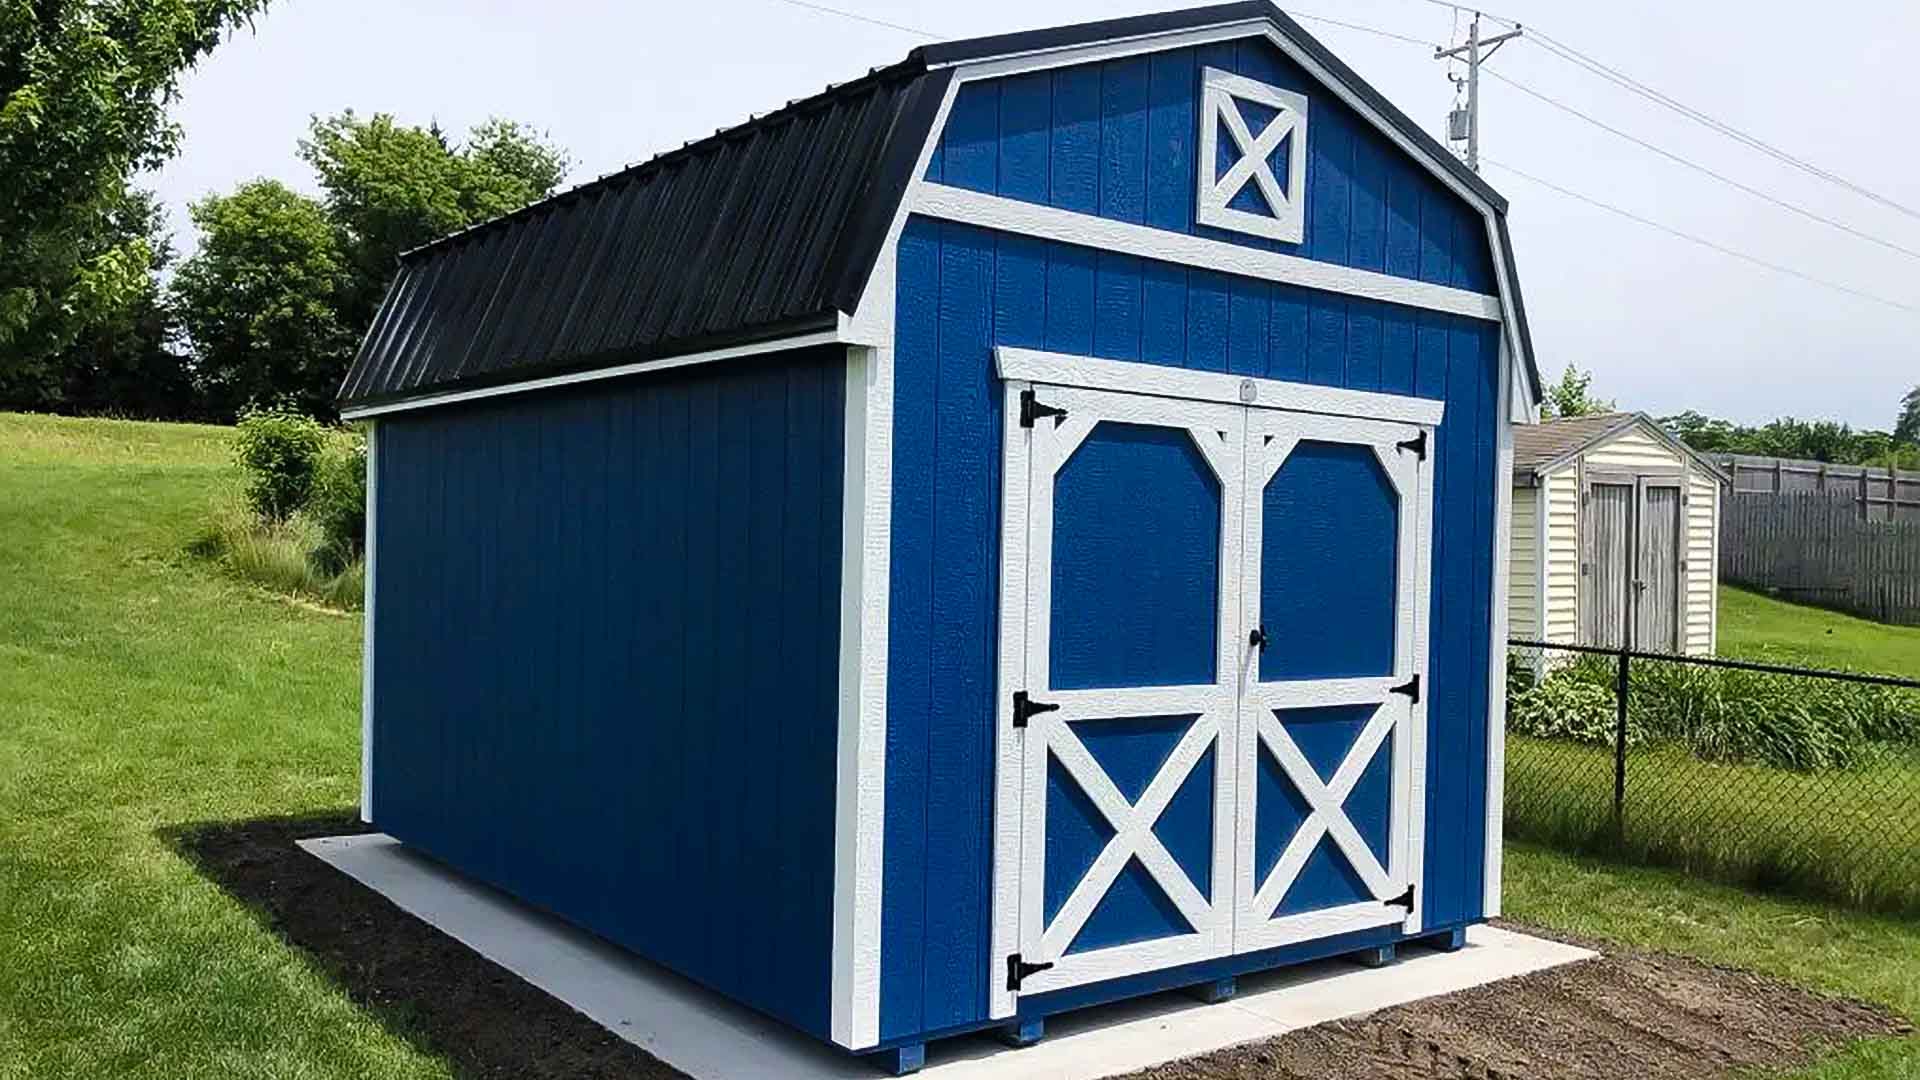 Sun Rise Sheds | 4 Things To Consider When Deciding On Shed Siding Options